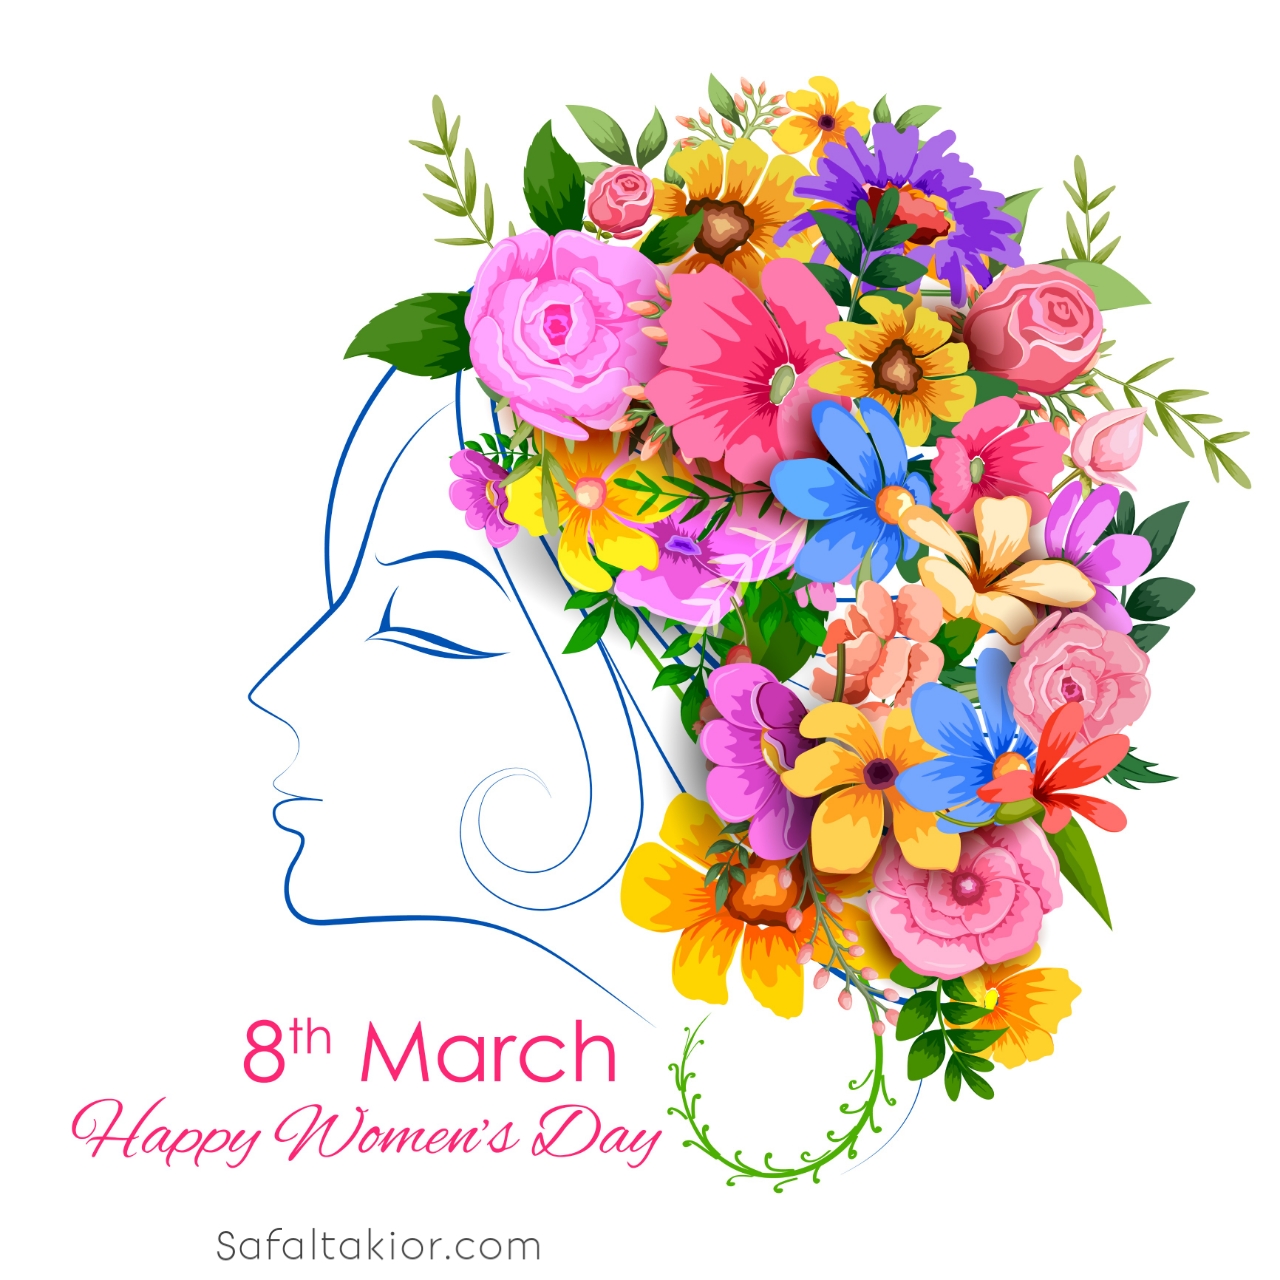 happy women's day messages